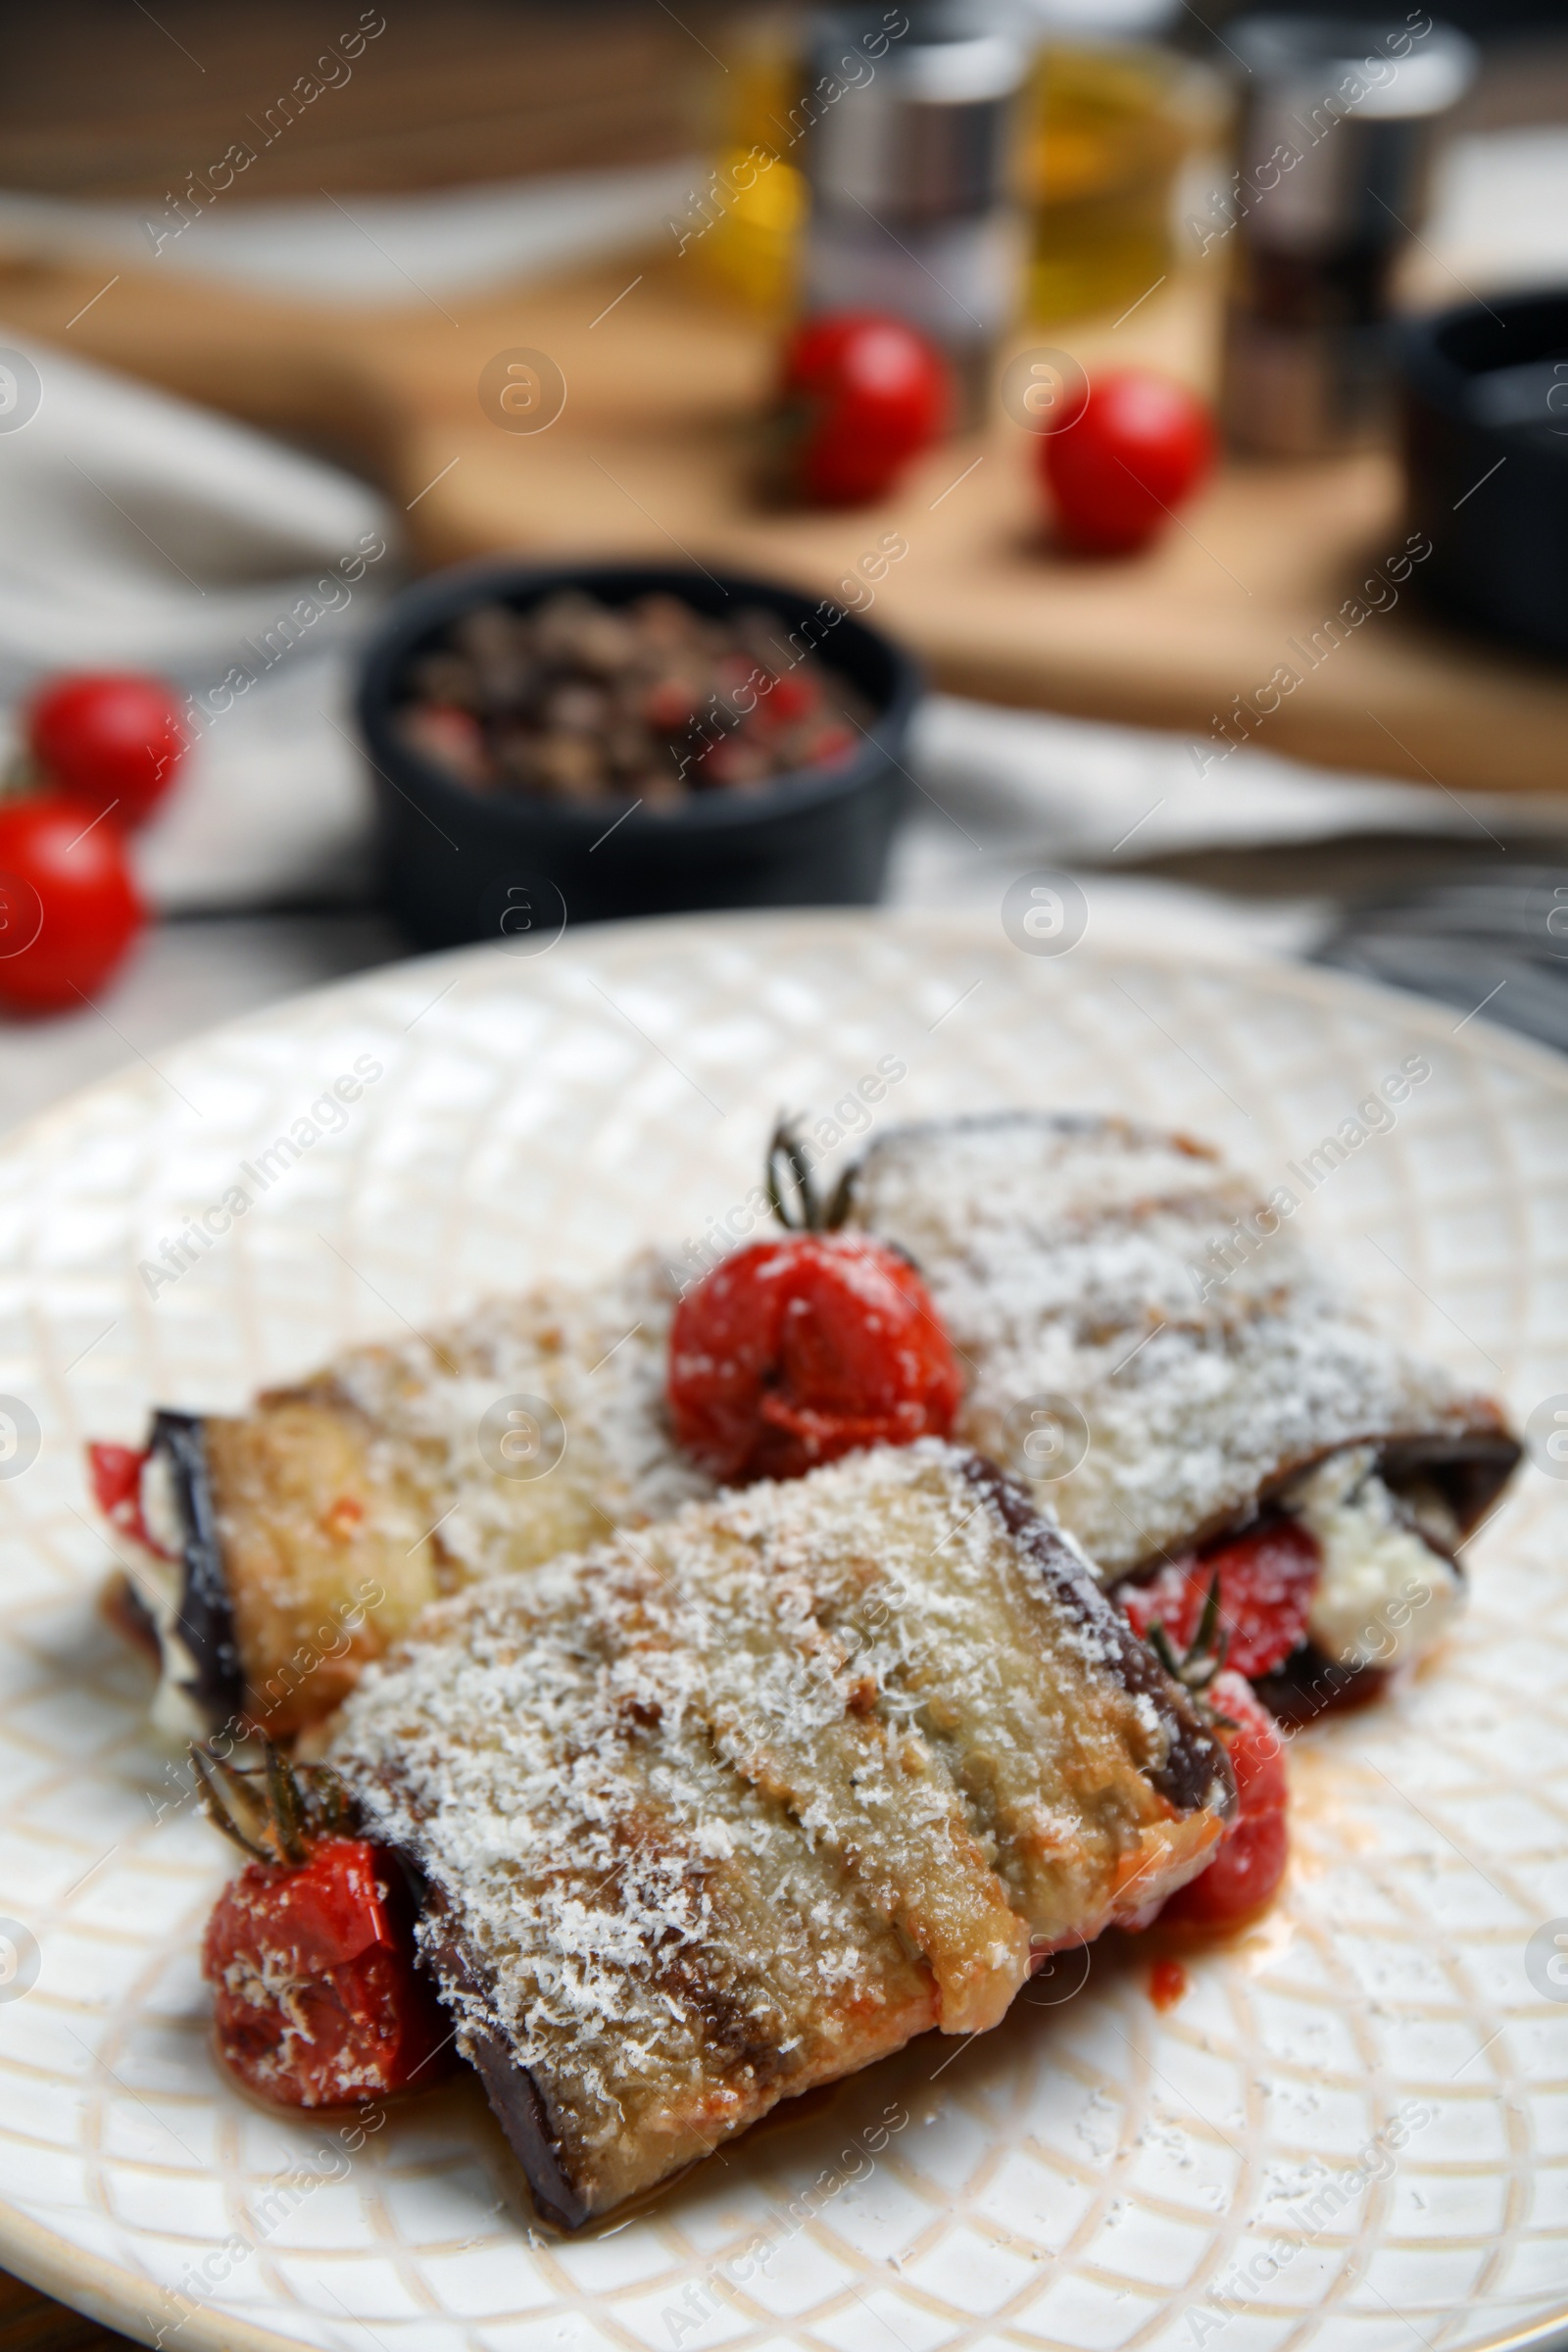 Photo of Delicious baked eggplant rolls with tomatoes and cheese on plate, closeup